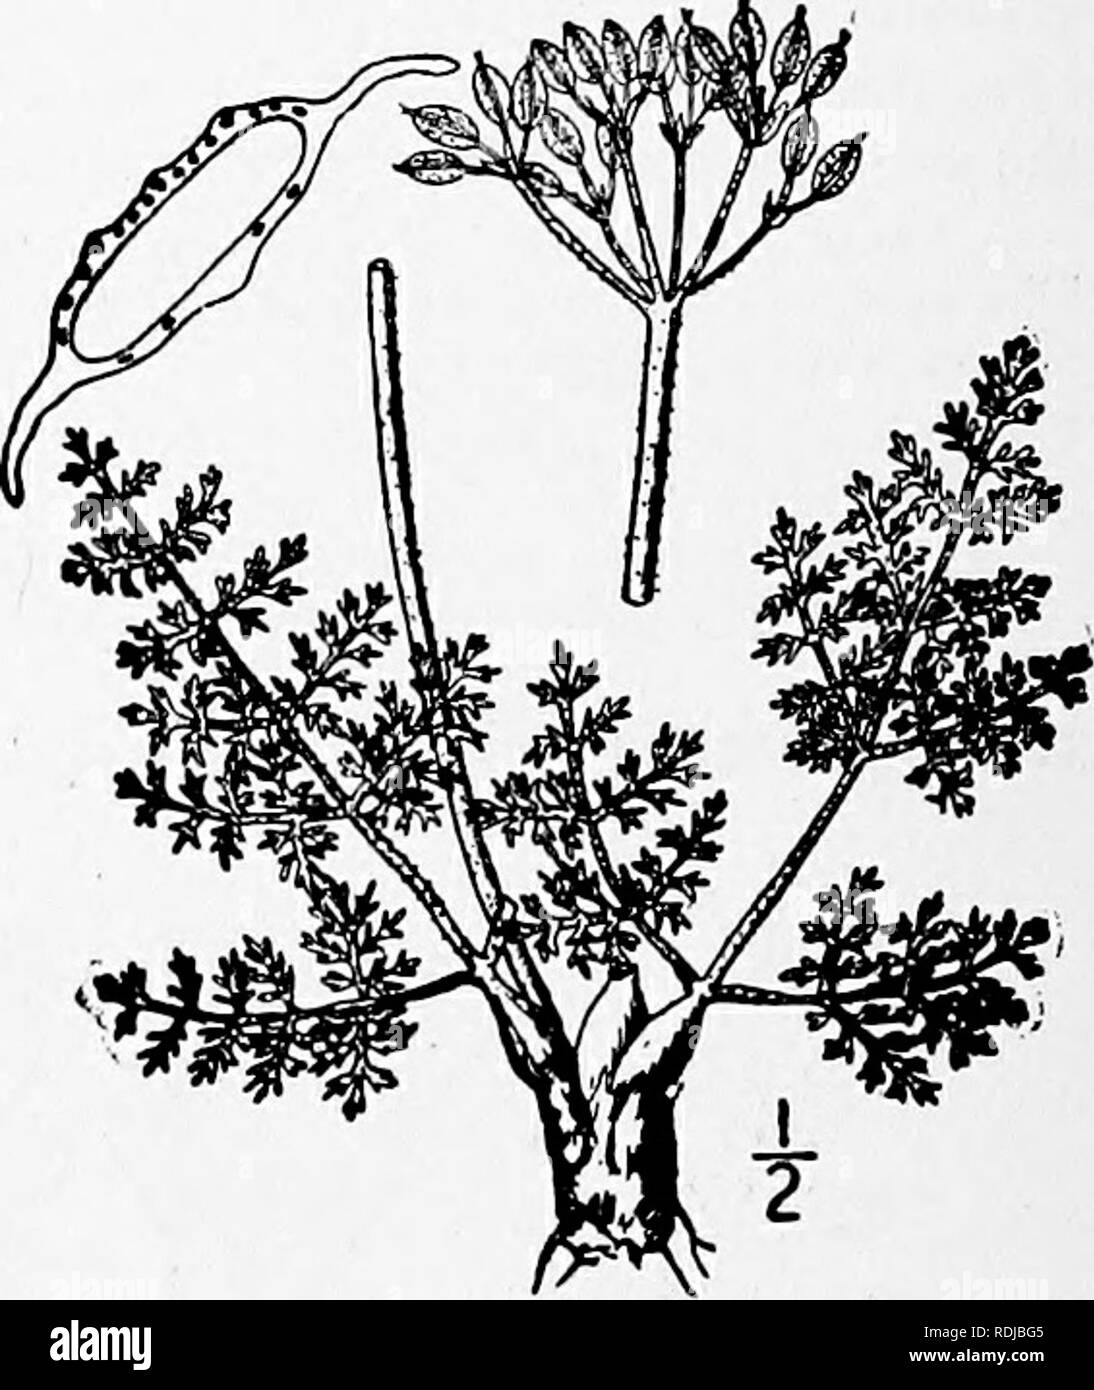 . An illustrated flora of the northern United States, Canada and the British possessions, from Newfoundland to the parallel of the southern boundary of Virginia, and from the Atlantic Ocean westward to the 102d meridian. Botany; Botany. 3. Cogswellia foeniculacea (Nutt.) Coult. &amp;Rose. Hairy Parsley. Fig. 3119. Ferula foeniculacea Nutt. Gen. i : 183. 1818. Lomatium villosum Raf. Journ. Phys. Eg. loi. 1819. Cogswellia villosa Spreng.; Roem, &amp; Schultes, Syst. 6: 588. 1820. Cogsivellia foeniculacea Coult. &amp; Rose, Contr. U. S. Nat. Herb. 12 : 449. 1909. Tomentose-pubescent; peduncles 3- Stock Photo